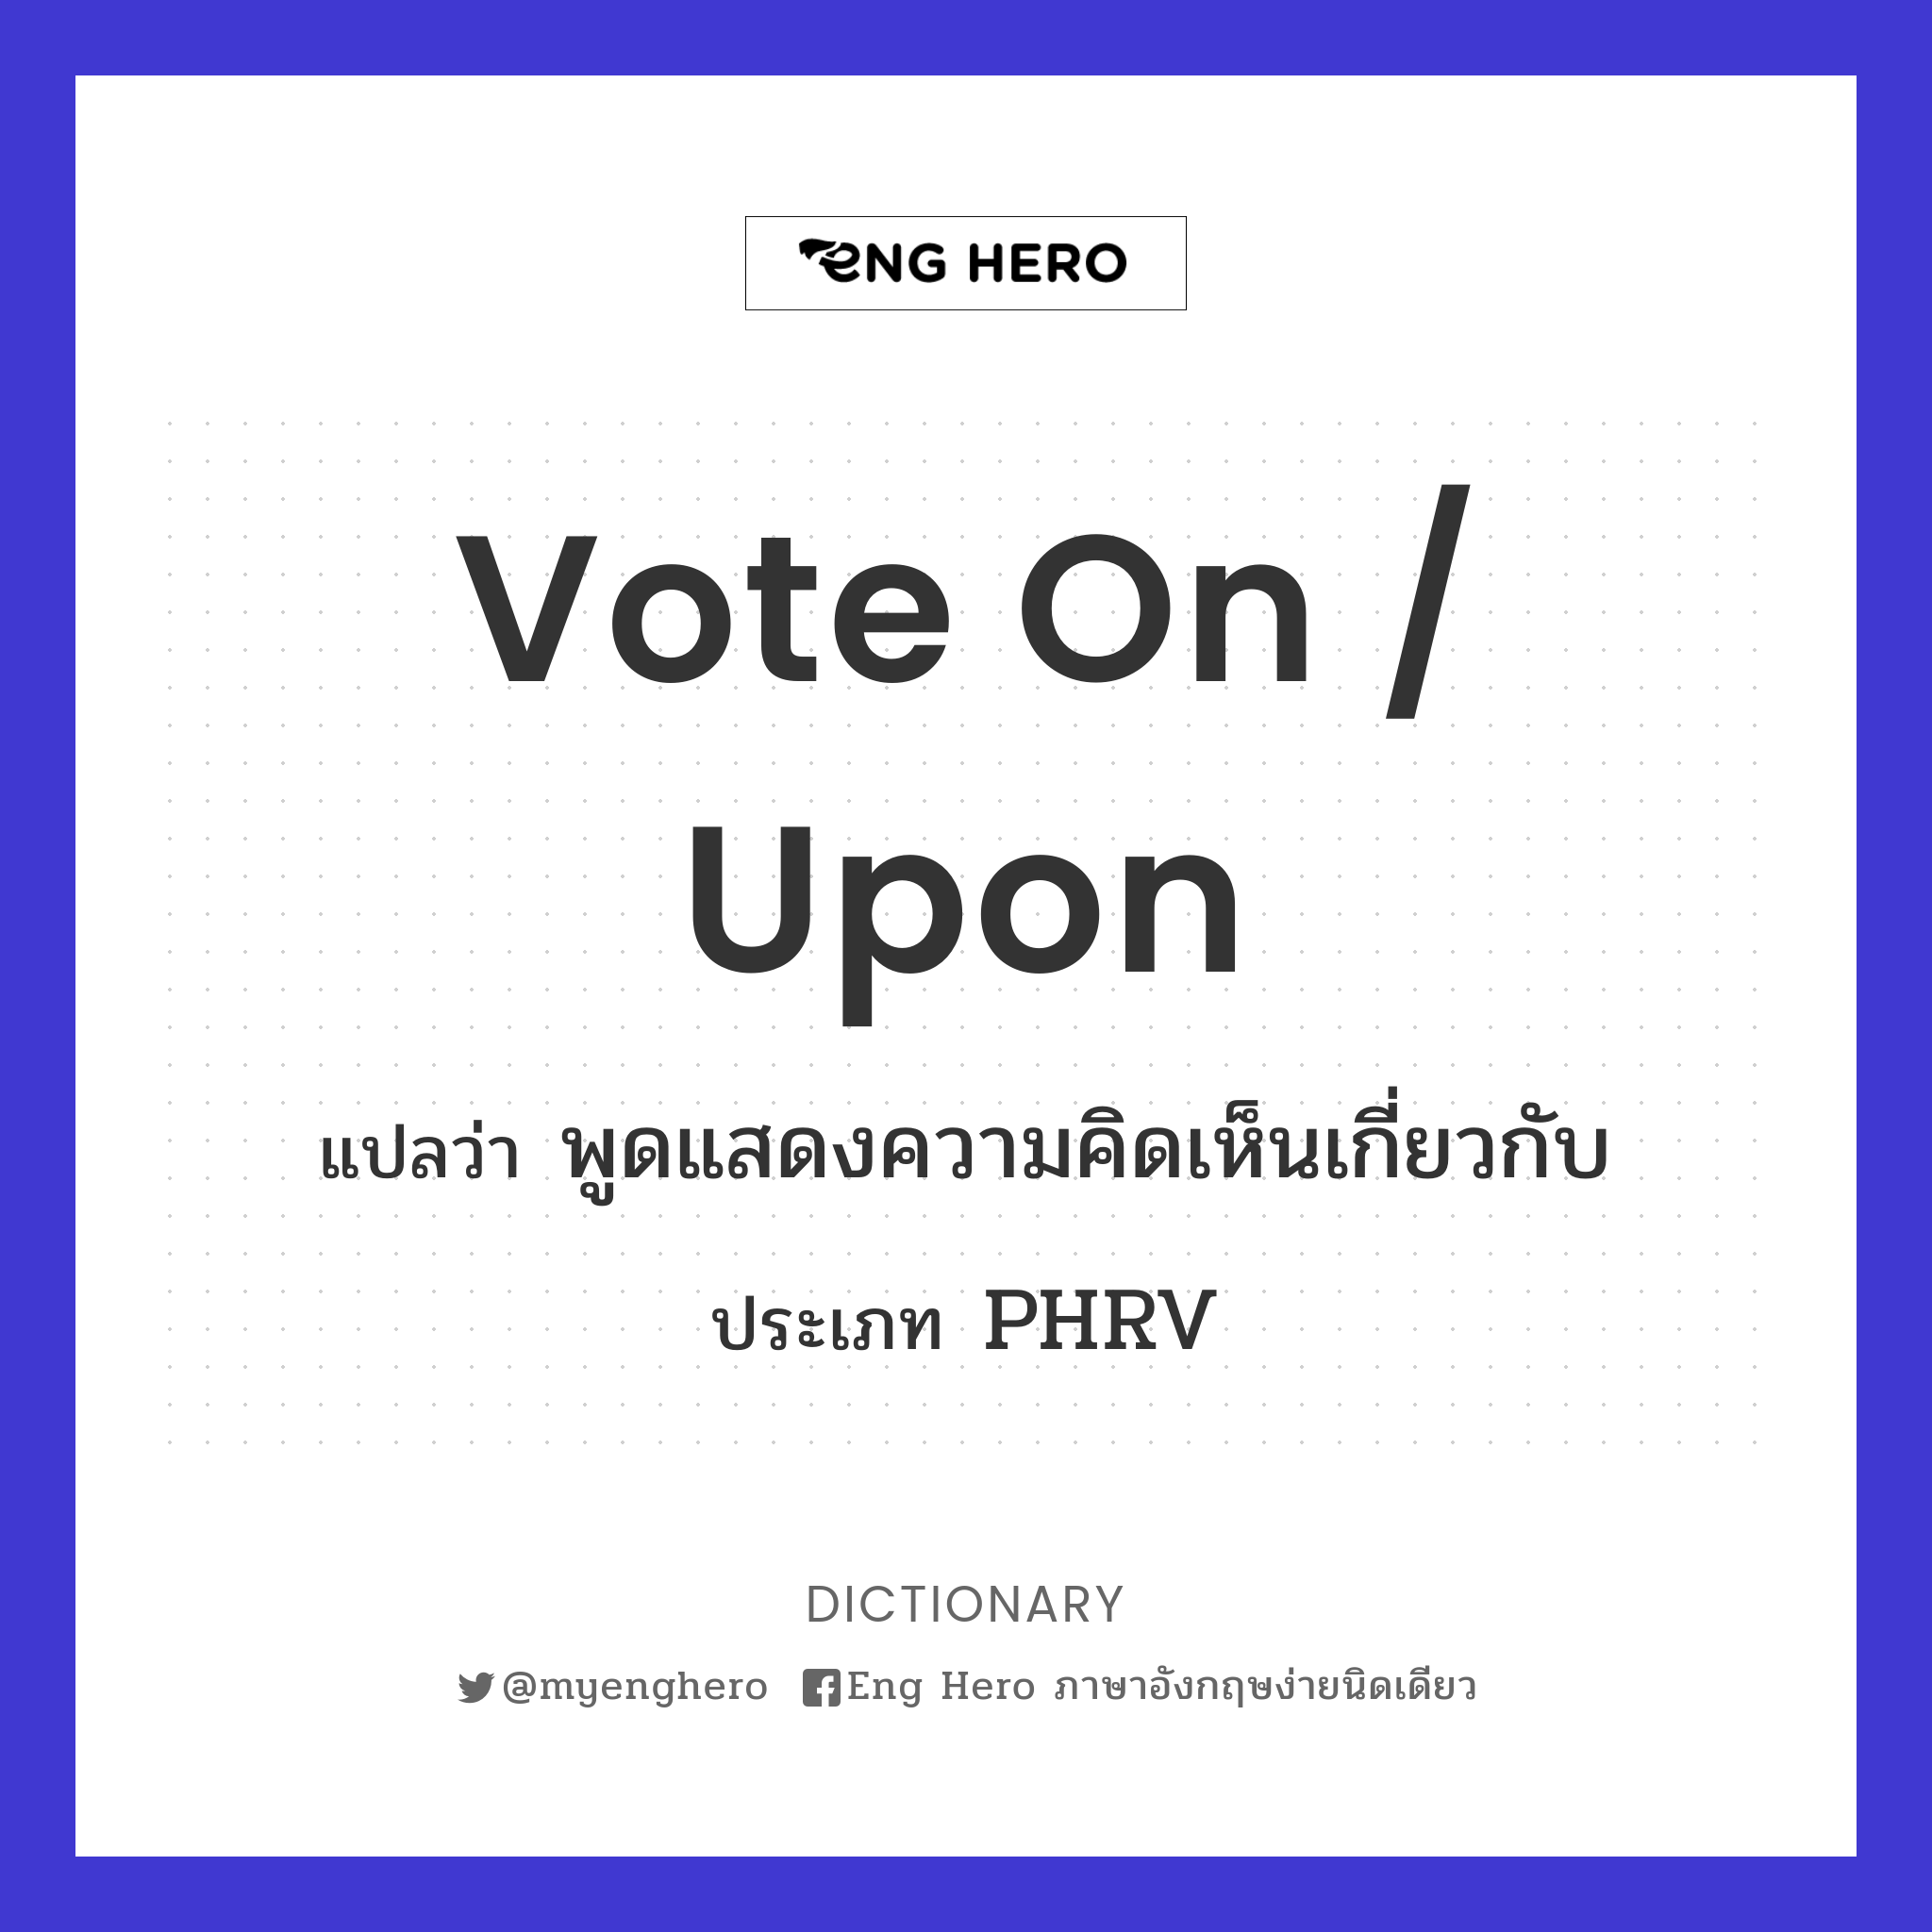 vote on / upon